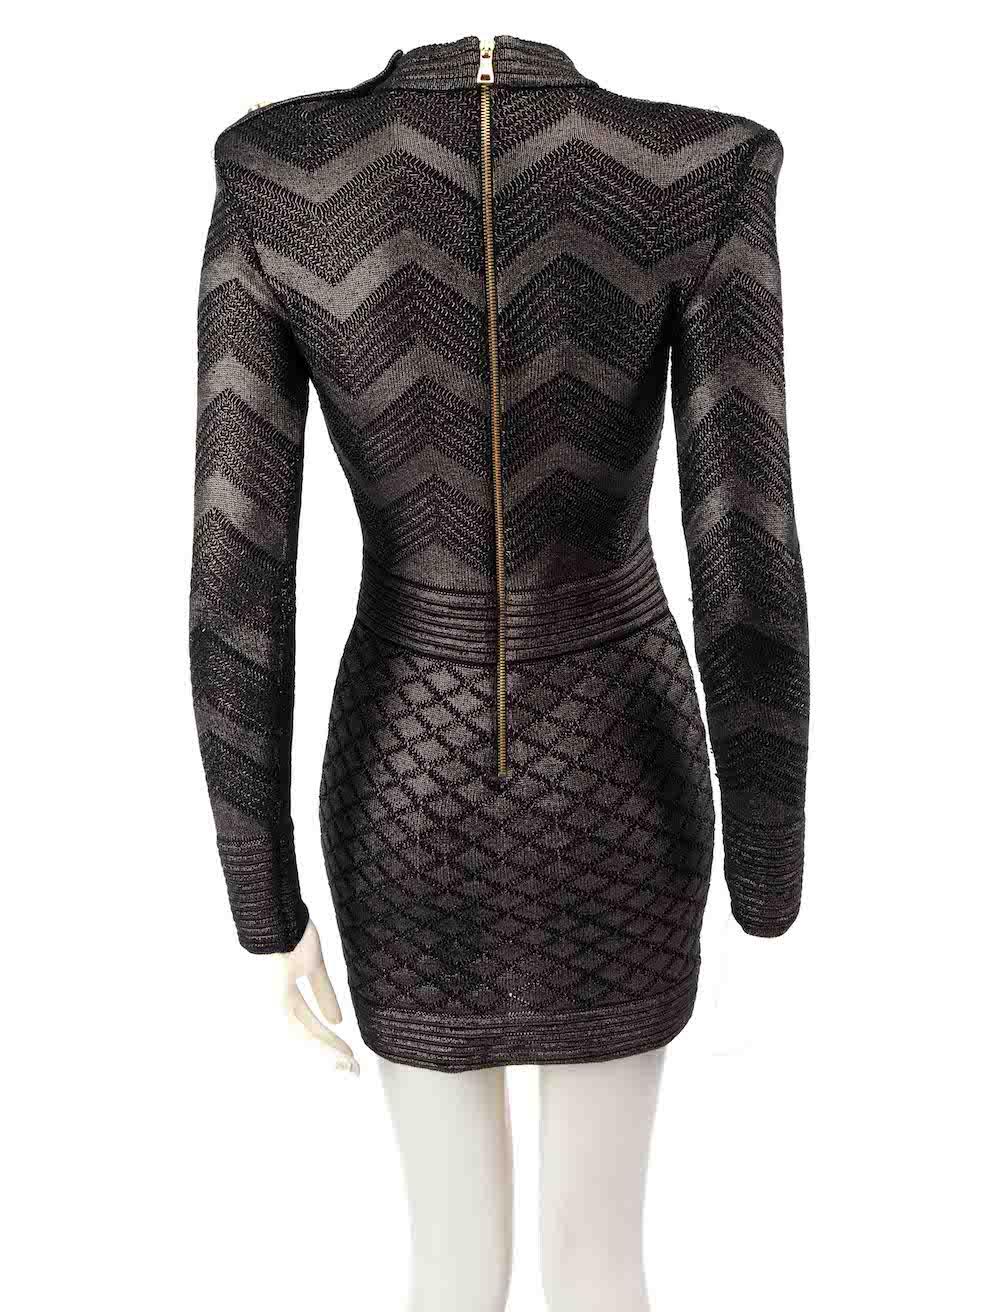 Balmain Anthracite Zig Zag Pattern Mini Dress Size XS In Excellent Condition For Sale In London, GB